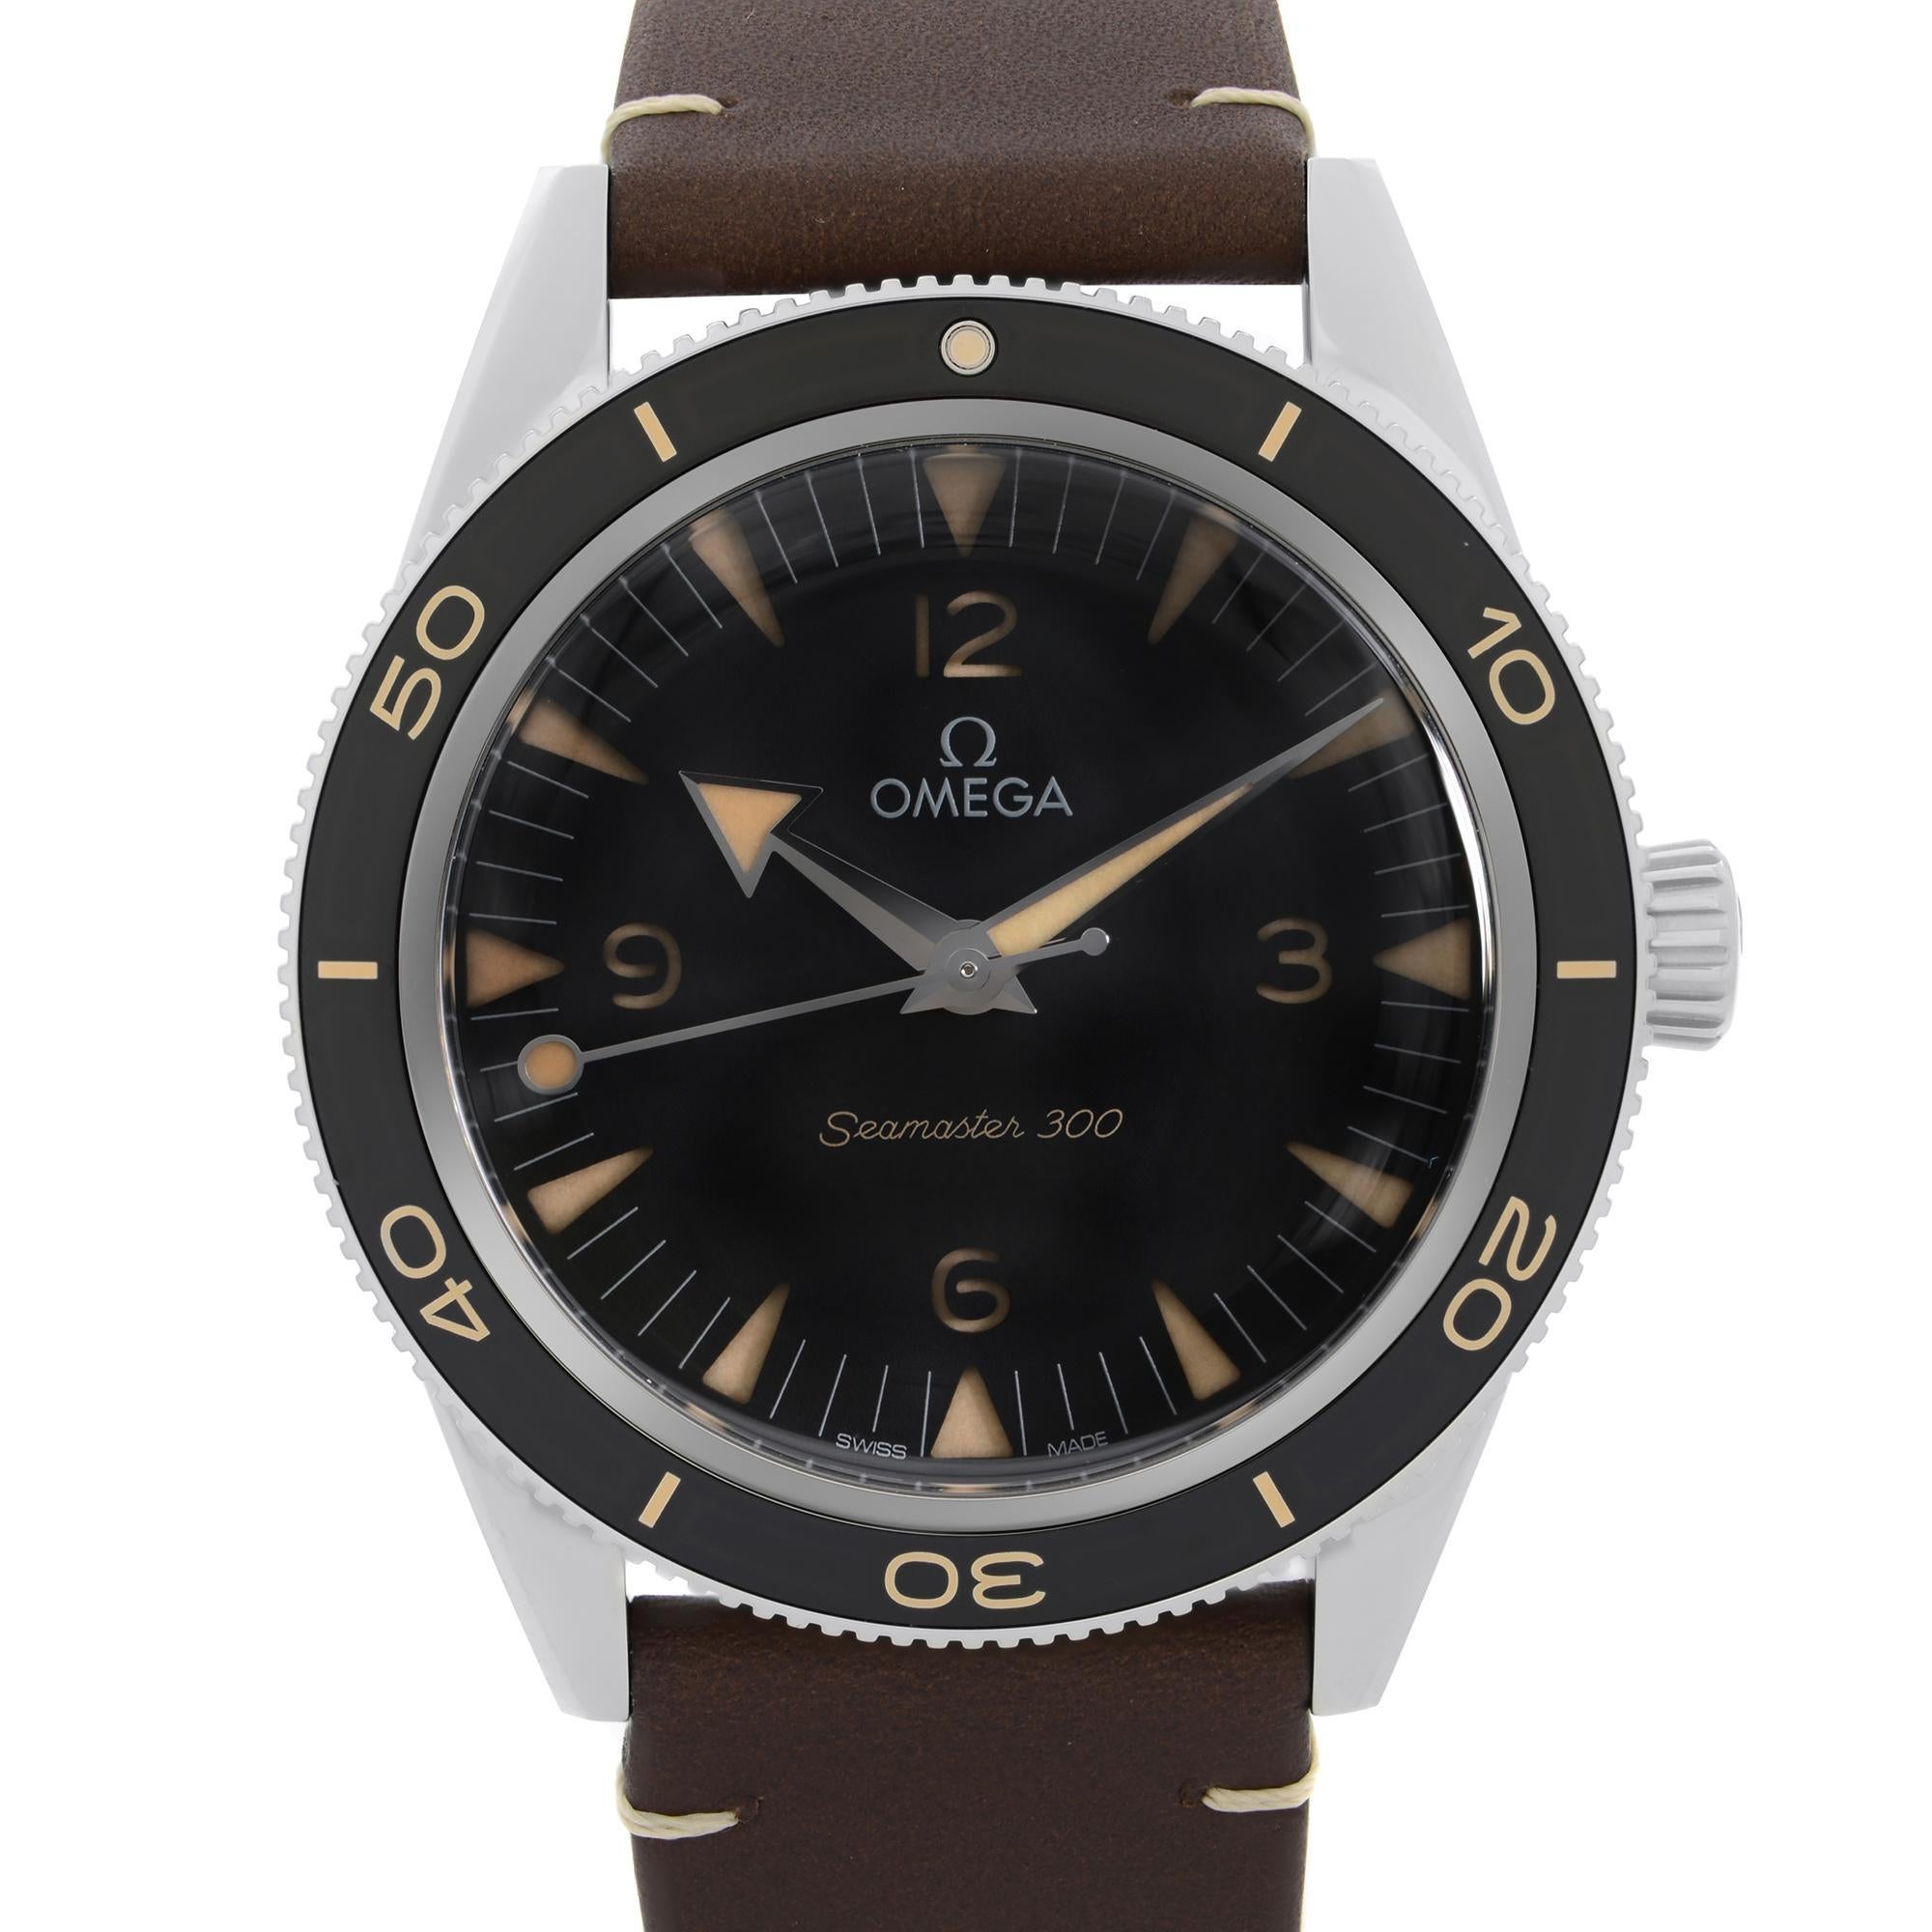 Display Model Omega Seamaster 300 41mm Steel Black Dial Automatic Watch 234.32.41.21.01.001. This Beautiful Men's Timepiece is Powered by an Automatic Movement and Features: Stainless Steel Case with a Brown Leather Strap, Unidirectional Stainless